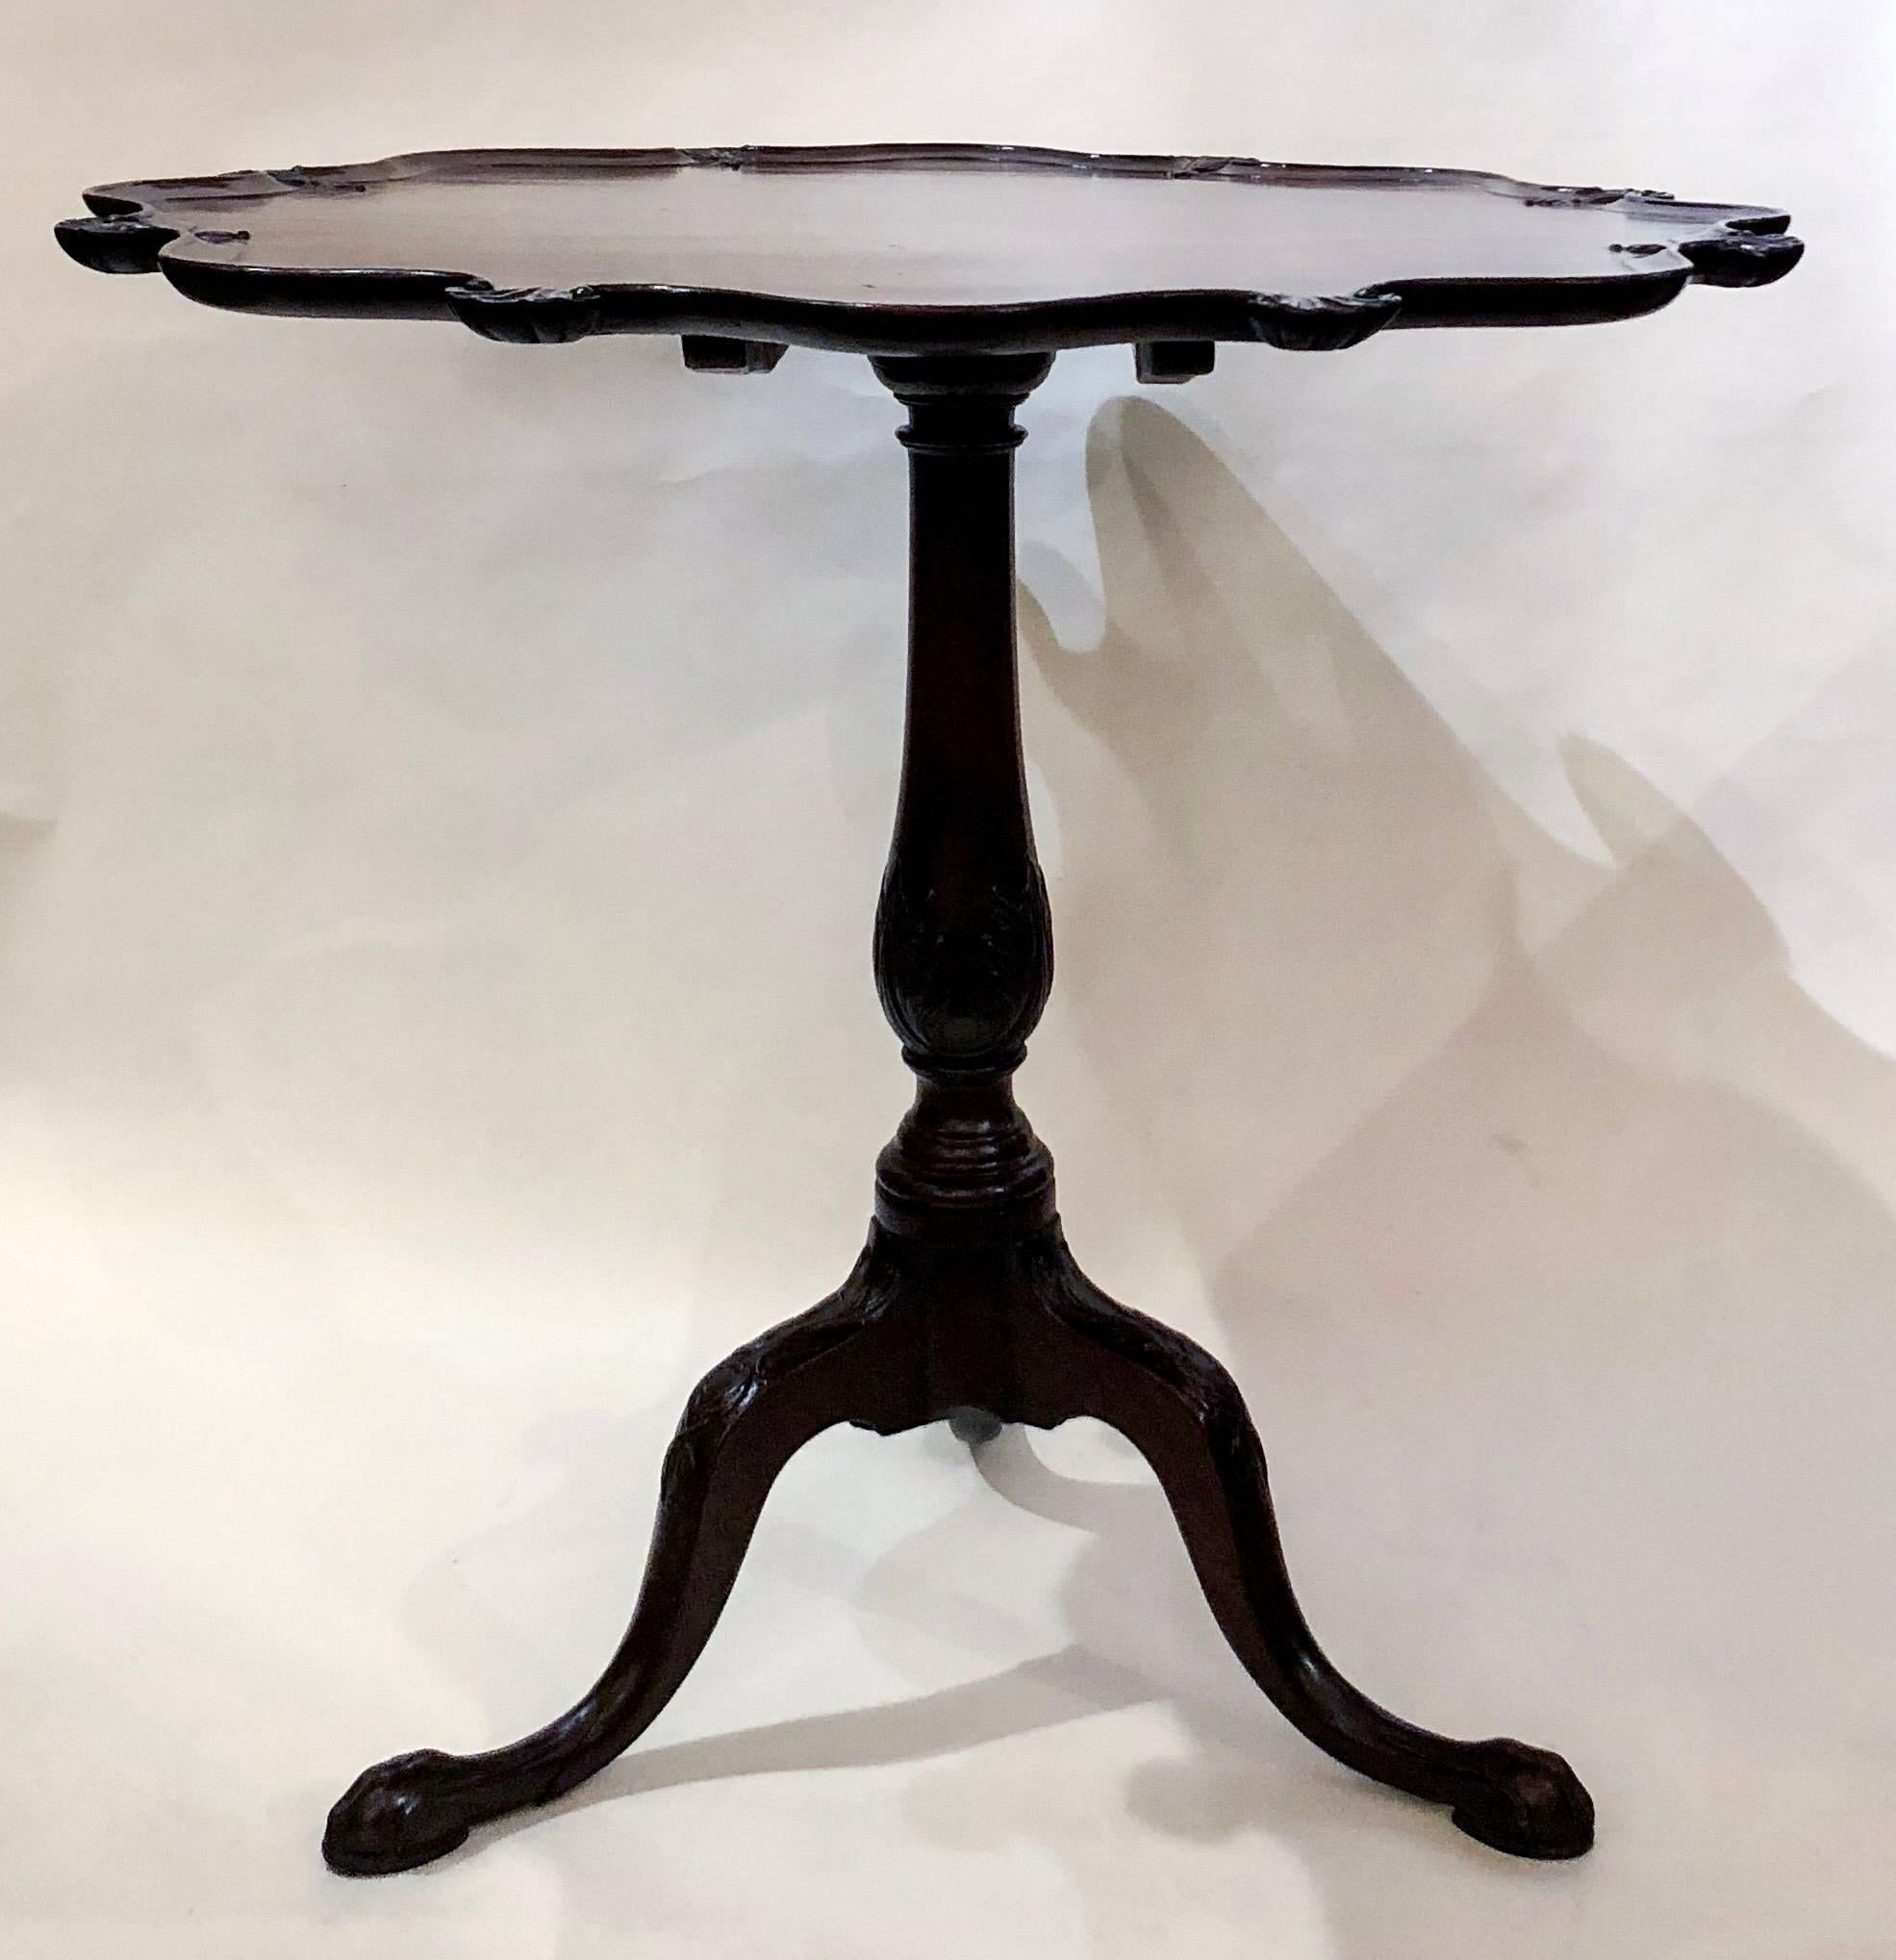 This is a handsome old pie-crust tilt table. When tilted, it stands 46 inches high.